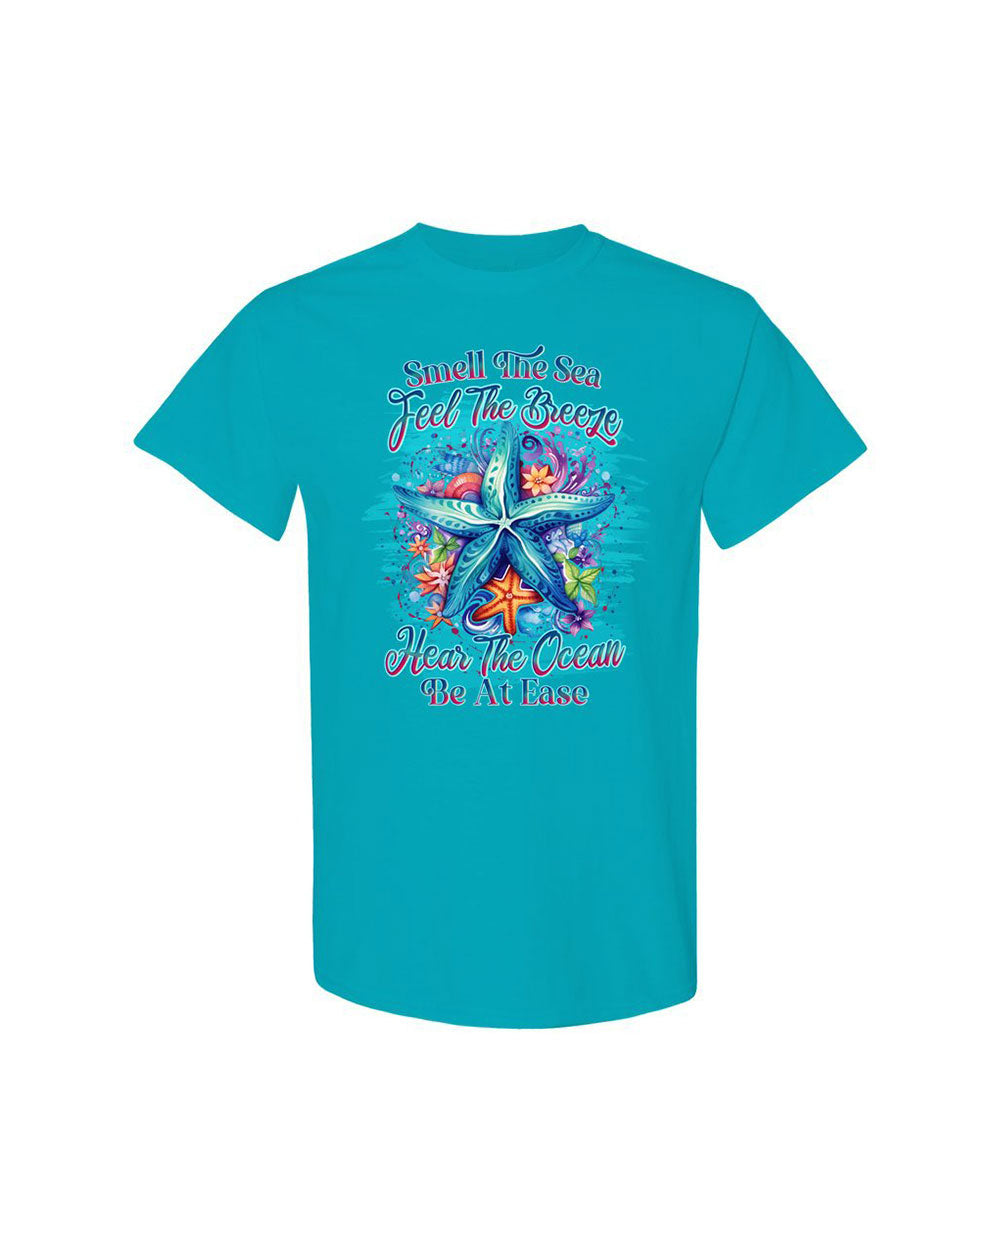 SMELL THE SEA FEEL THE BREEZE STARFISH COTTON SHIRT - YHLN1107231